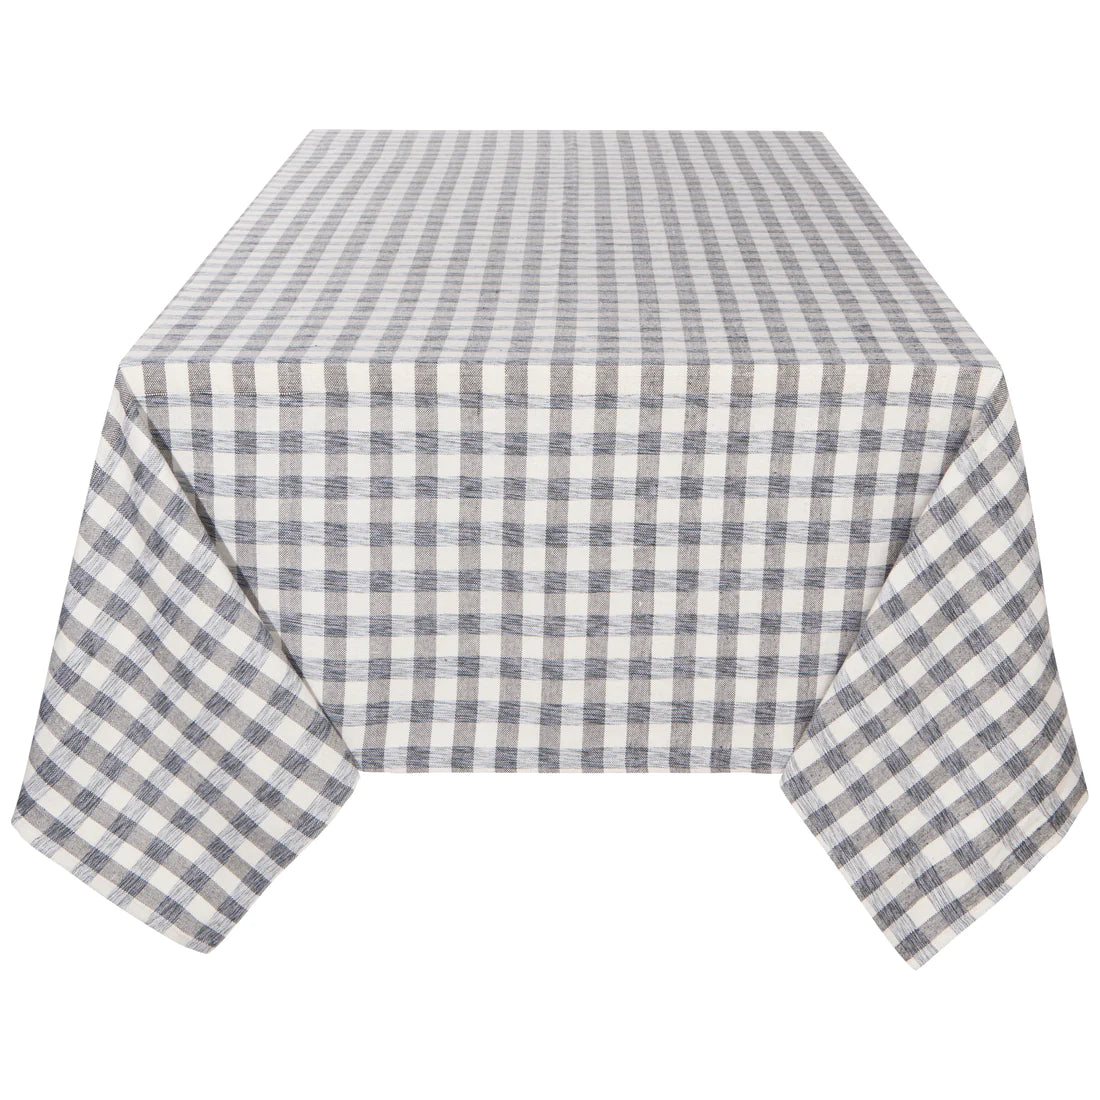 Recycled Tablecloth Second Spin - Twisted Grey